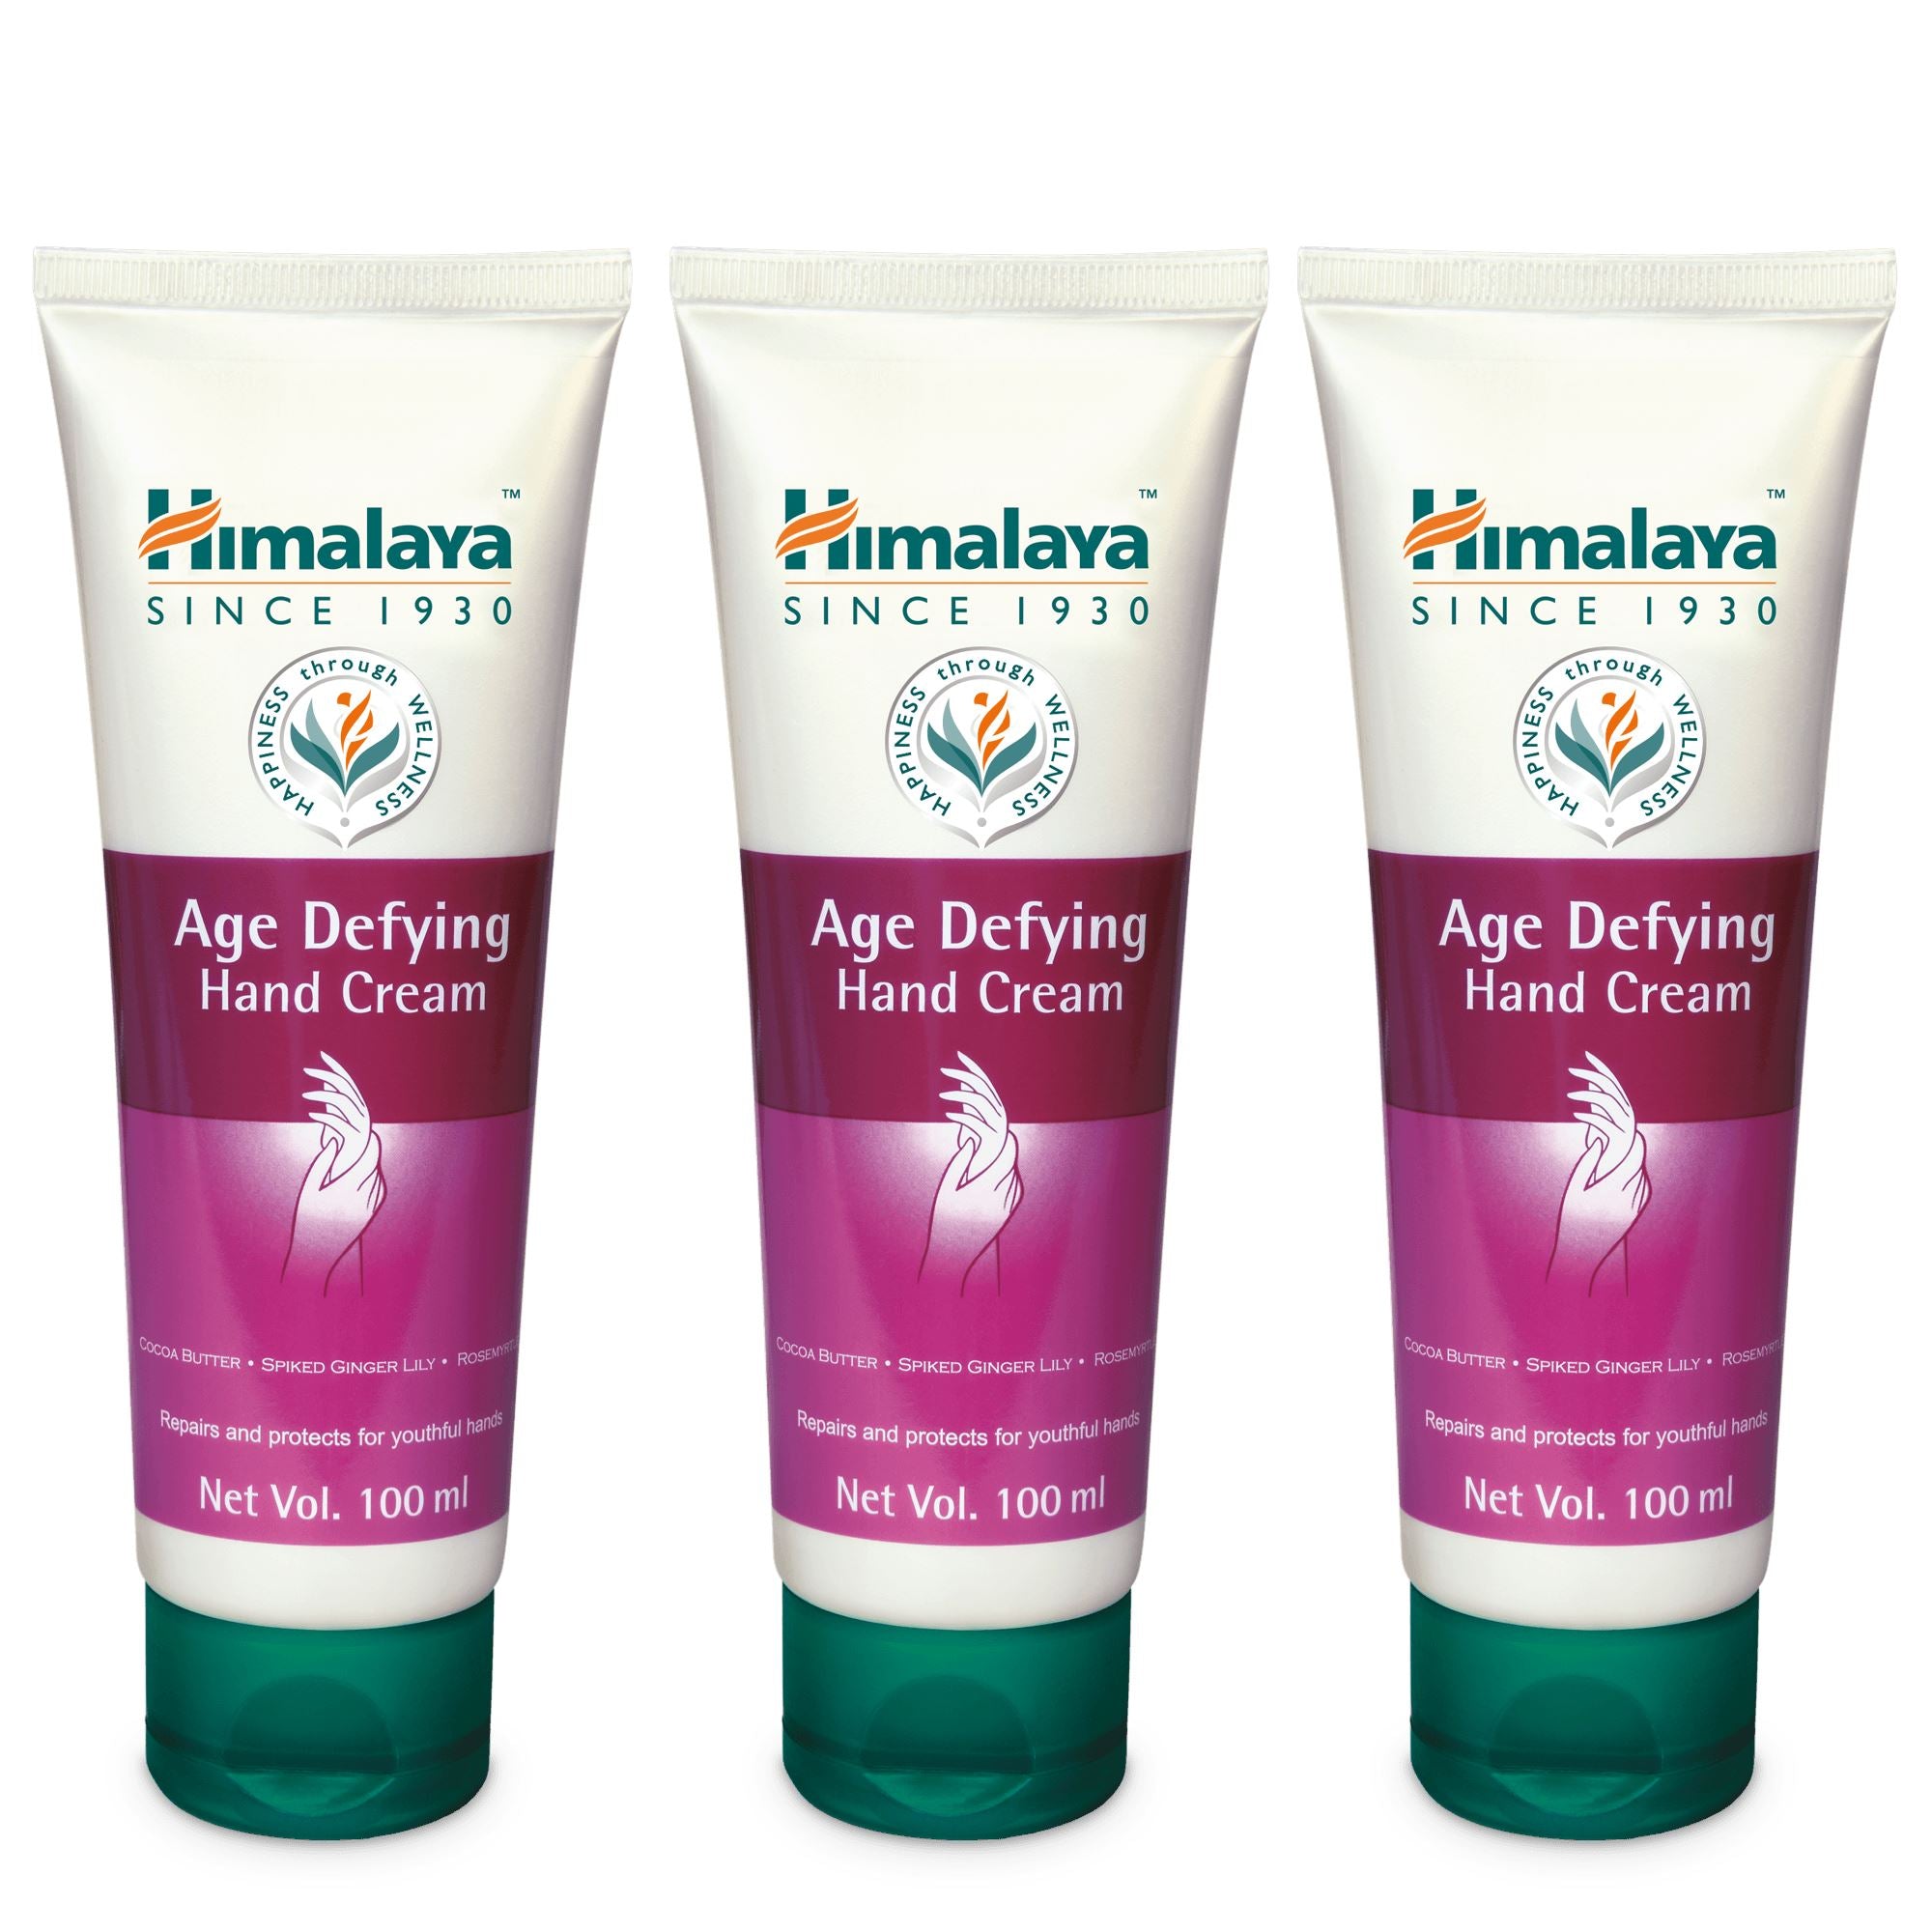 Hiamlaya Age Defying Hand Cream 100ml (Pack of 3) - Repairs and protects for youthful hands